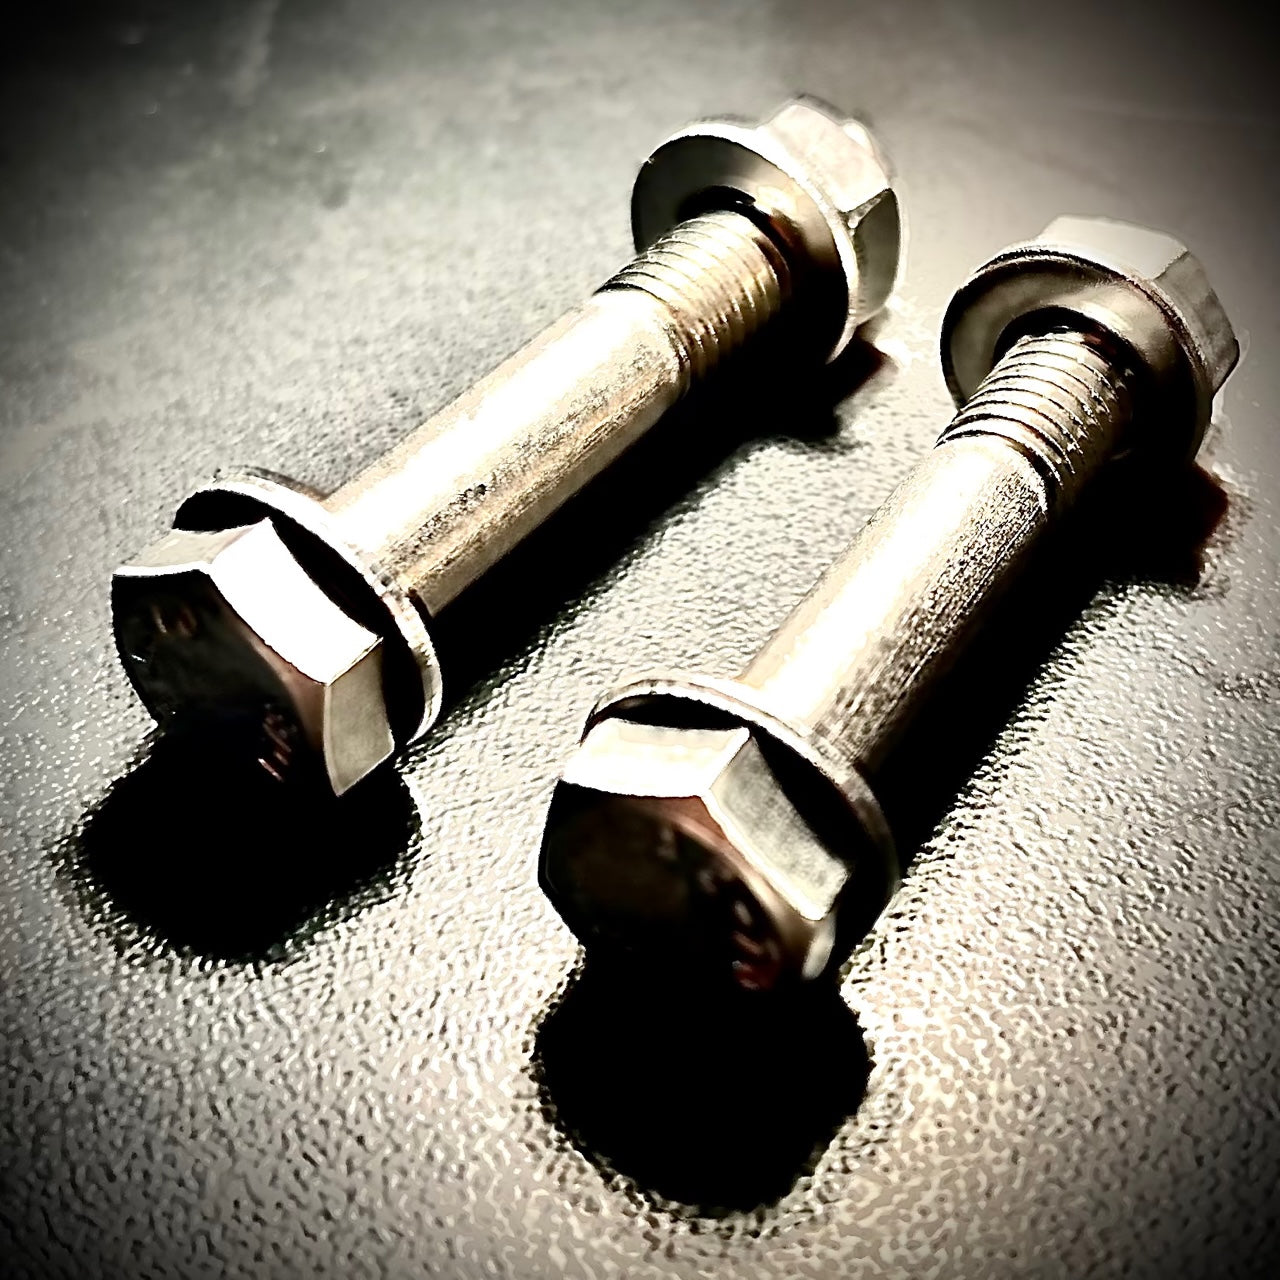 M8 x Over 100mm Hex Bolt plus Nut and Washers A2/ 304 Stainless Steel DIN 931 - Fixaball Ltd. Fixings and Fasteners UK